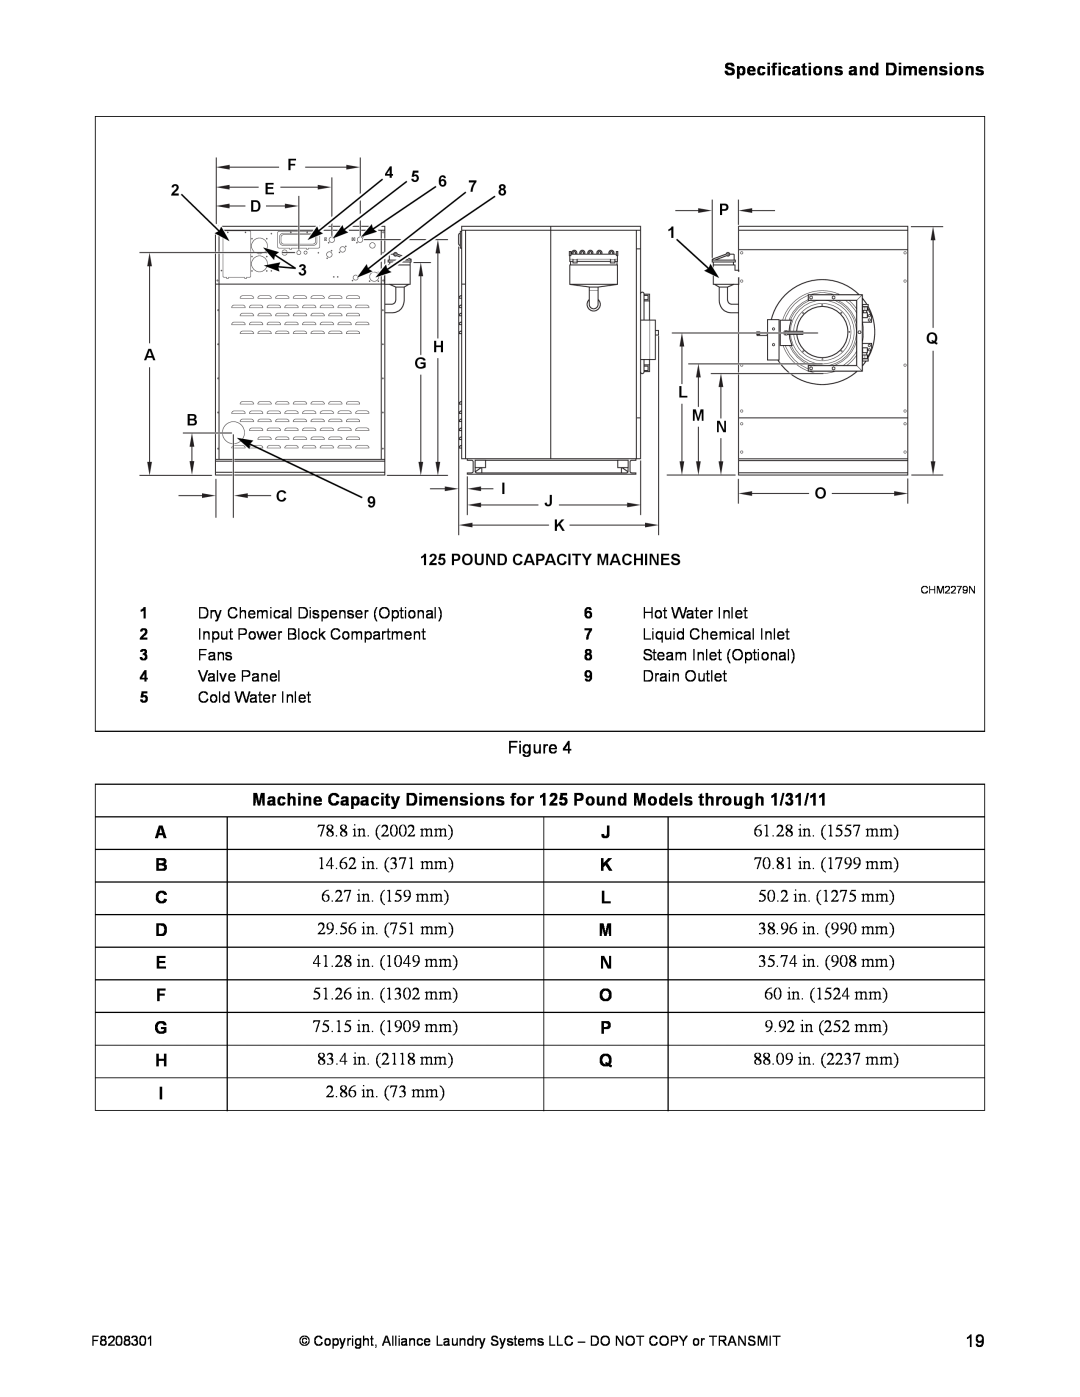 Alliance Laundry Systems CHM1772C manual Specifications and Dimensions, 78.8 in. 2002 mm 